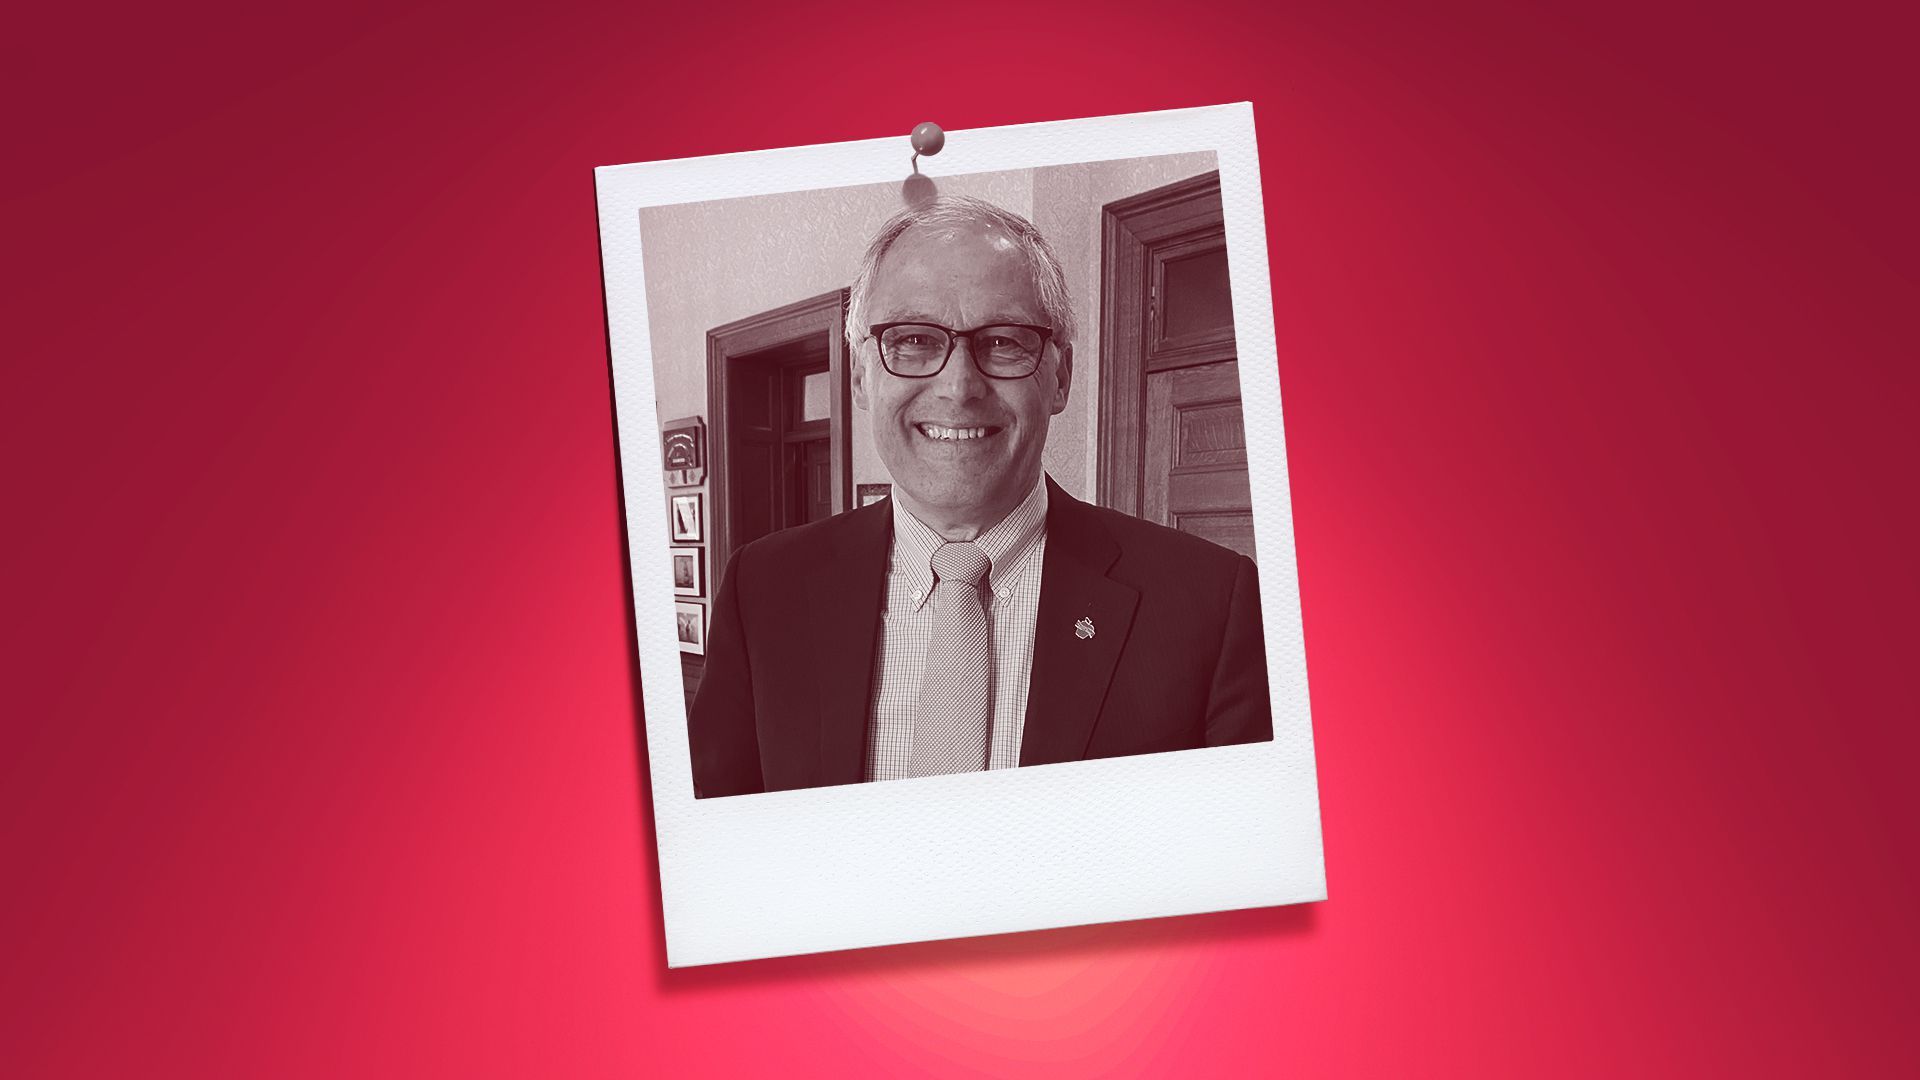 Photo illustration of Gov. Jay Inslee, in an instant photo pinned to a red wall.